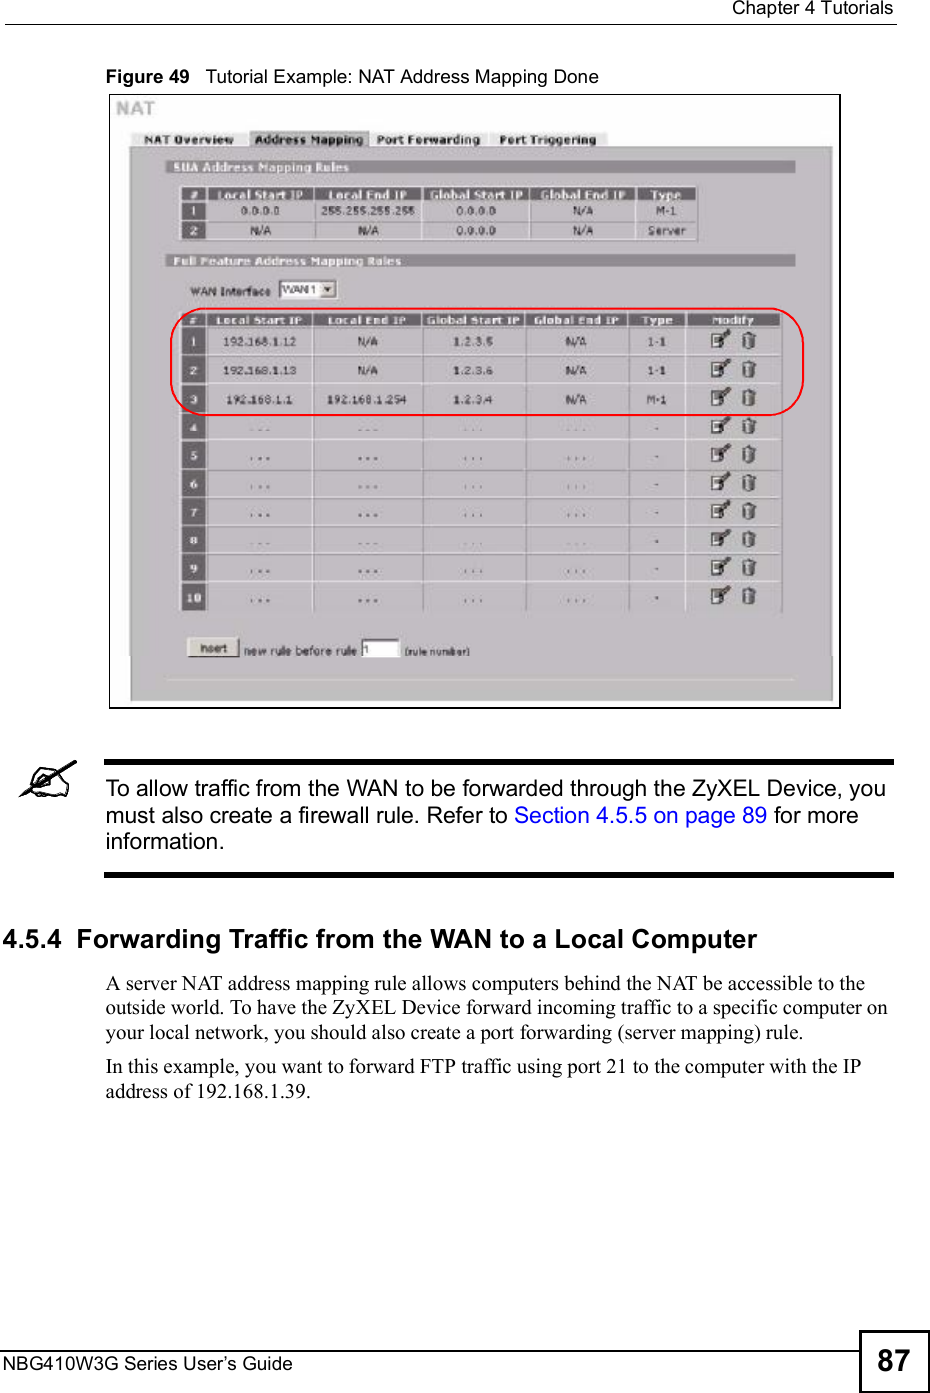  Chapter 4TutorialsNBG410W3G Series User s Guide 87Figure 49   Tutorial Example: NAT Address Mapping Done  To allow traffic from the WAN to be forwarded through the ZyXEL Device, you must also create a firewall rule. Refer to Section 4.5.5 on page 89 for more information.4.5.4  Forwarding Traffic from the WAN to a Local ComputerA server NAT address mapping rule allows computers behind the NAT be accessible to the outside world. To have the ZyXEL Device forward incoming traffic to a specific computer on your local network, you should also create a port forwarding (server mapping) rule.In this example, you want to forward FTP traffic using port 21 to the computer with the IP address of 192.168.1.39.